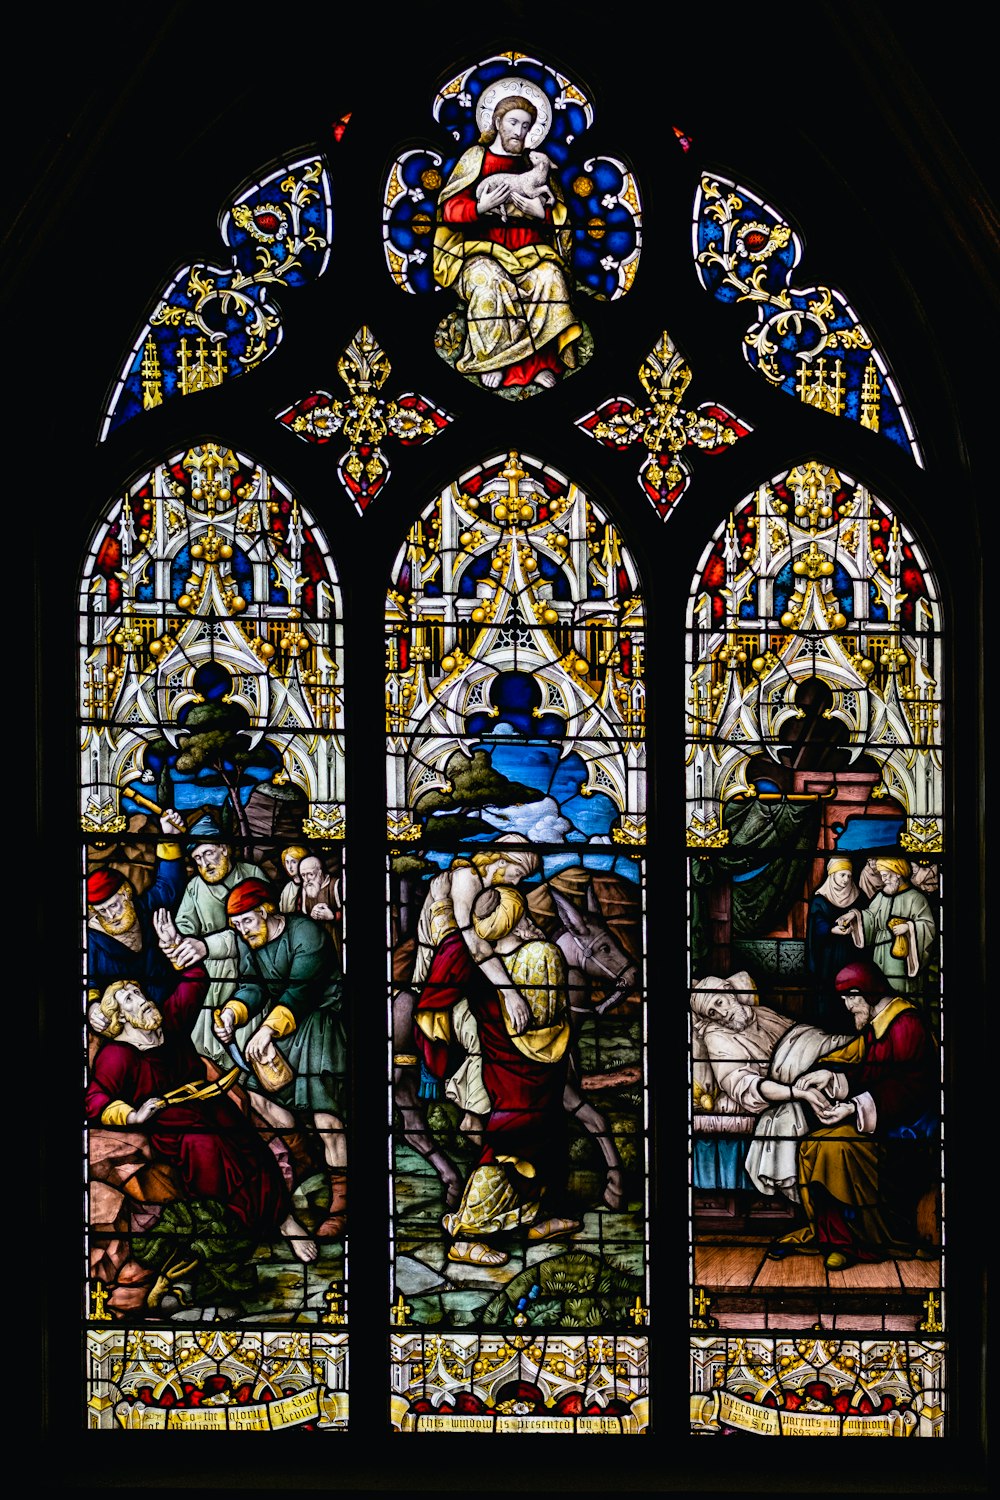 a stained glass window depicting a scene of a birth of jesus